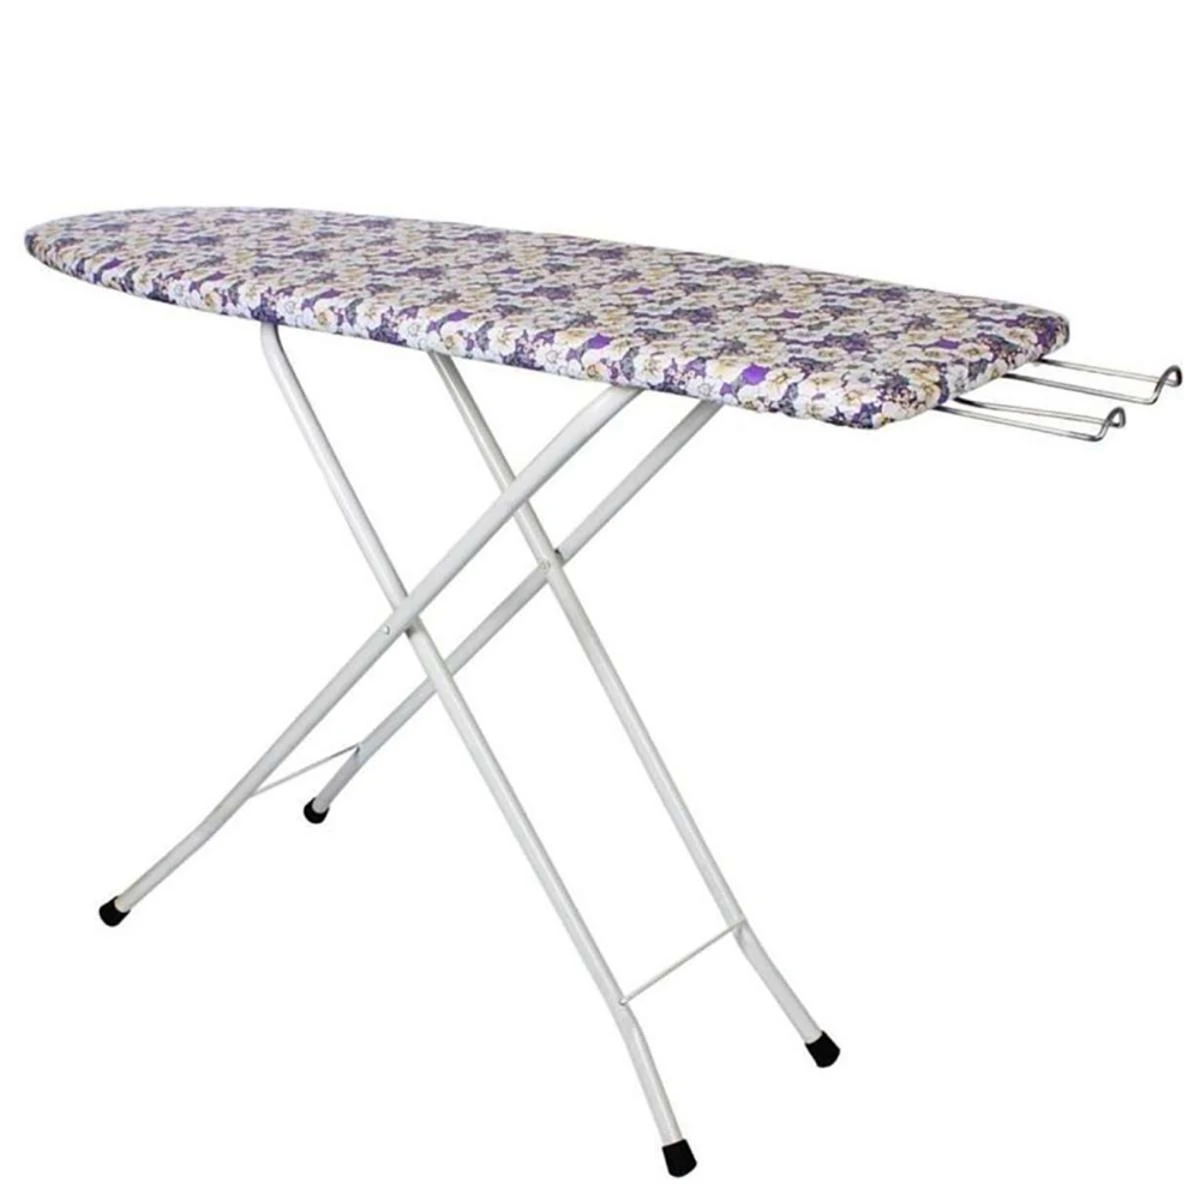 Folding Iron Table 14.42 Inches - Multi color